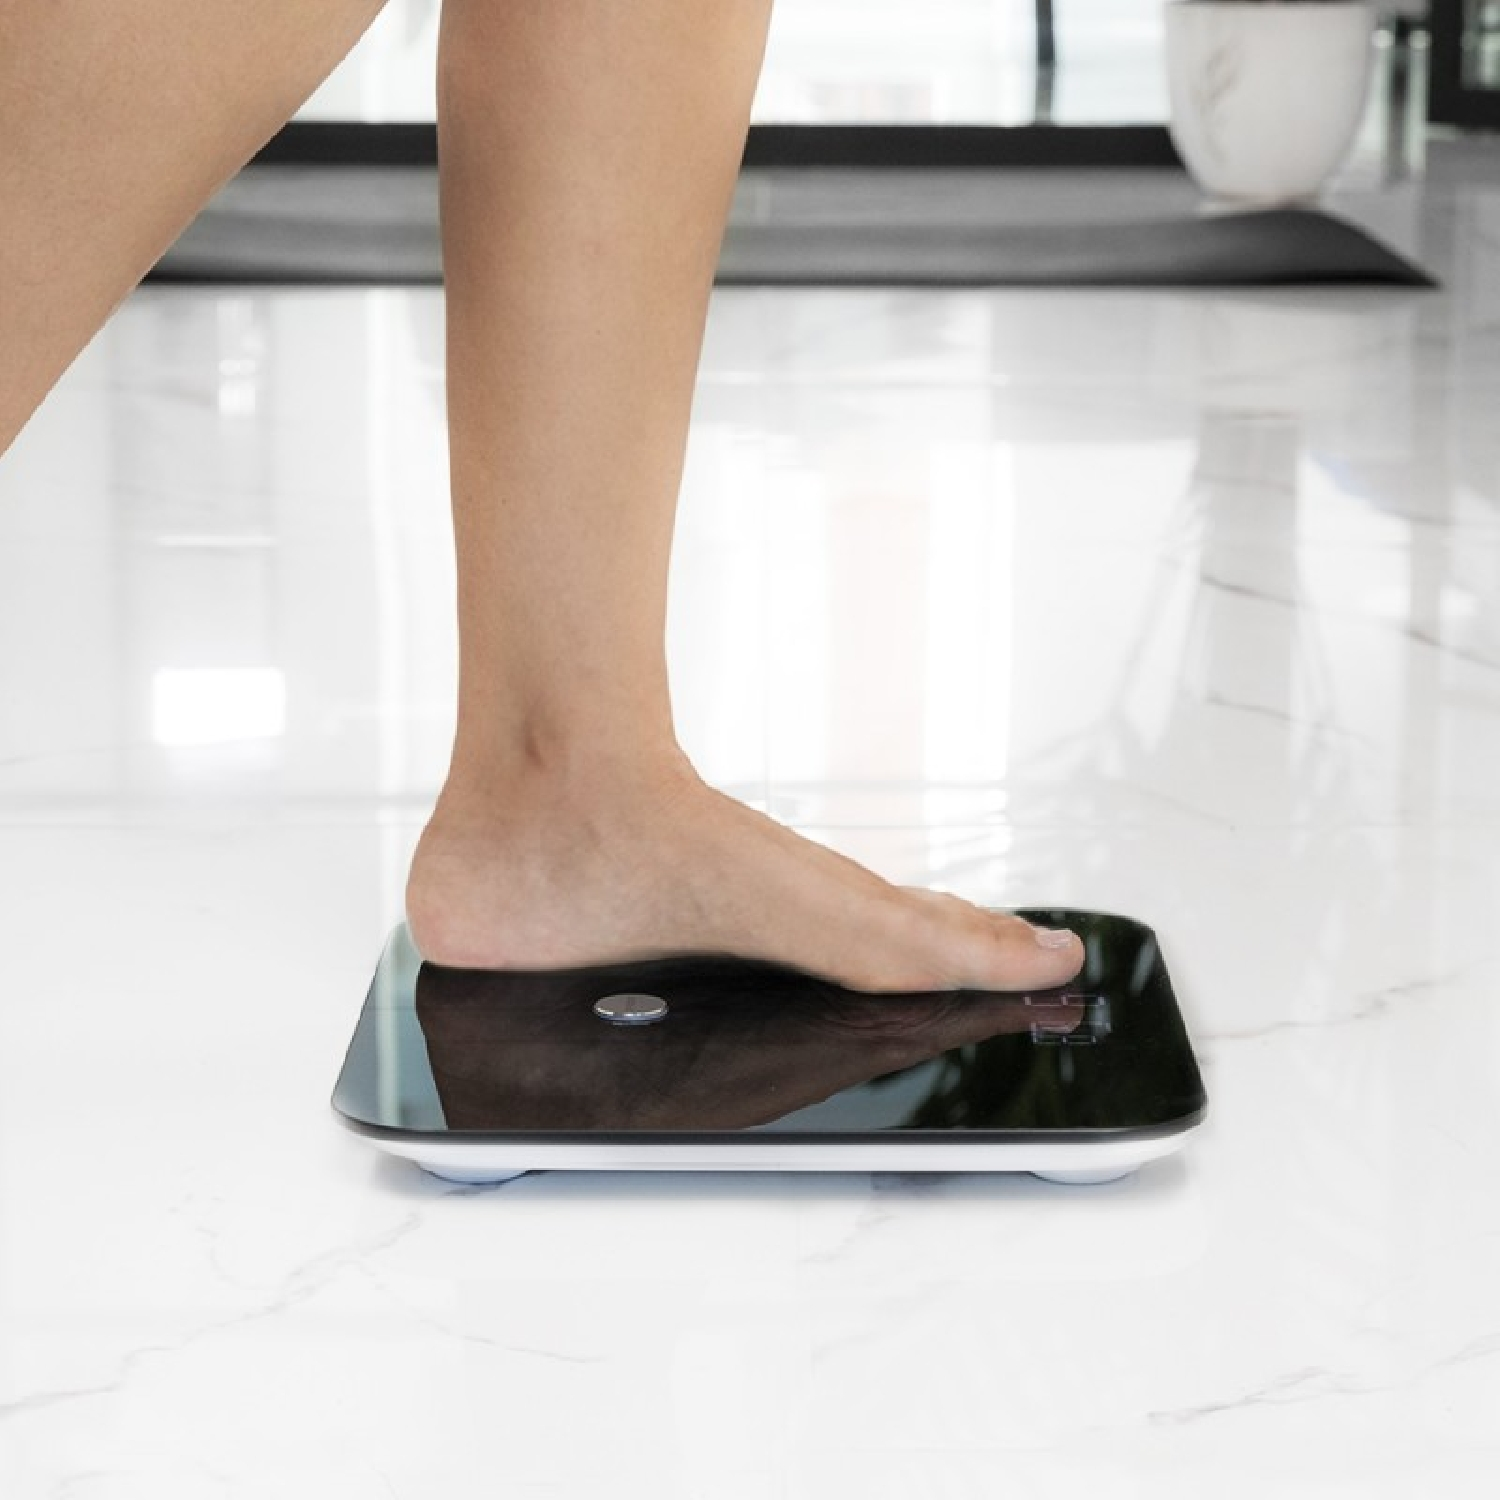 CECOTEC Surface Personal Healthy 9750 Precision Smart Scale